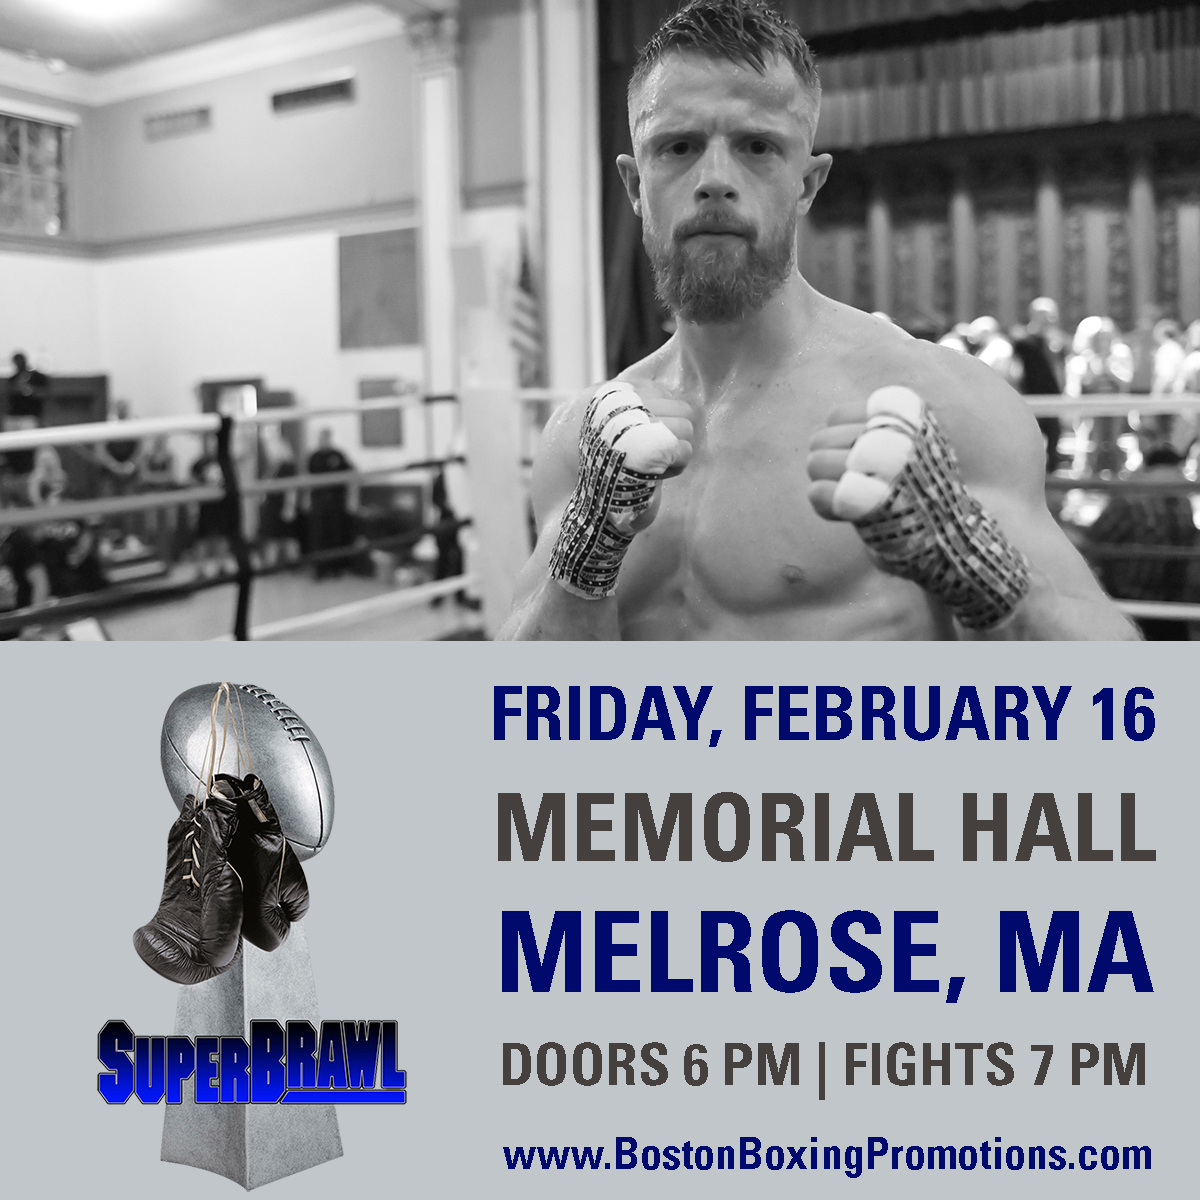 Boxing Melrose MA February 16 tickets event